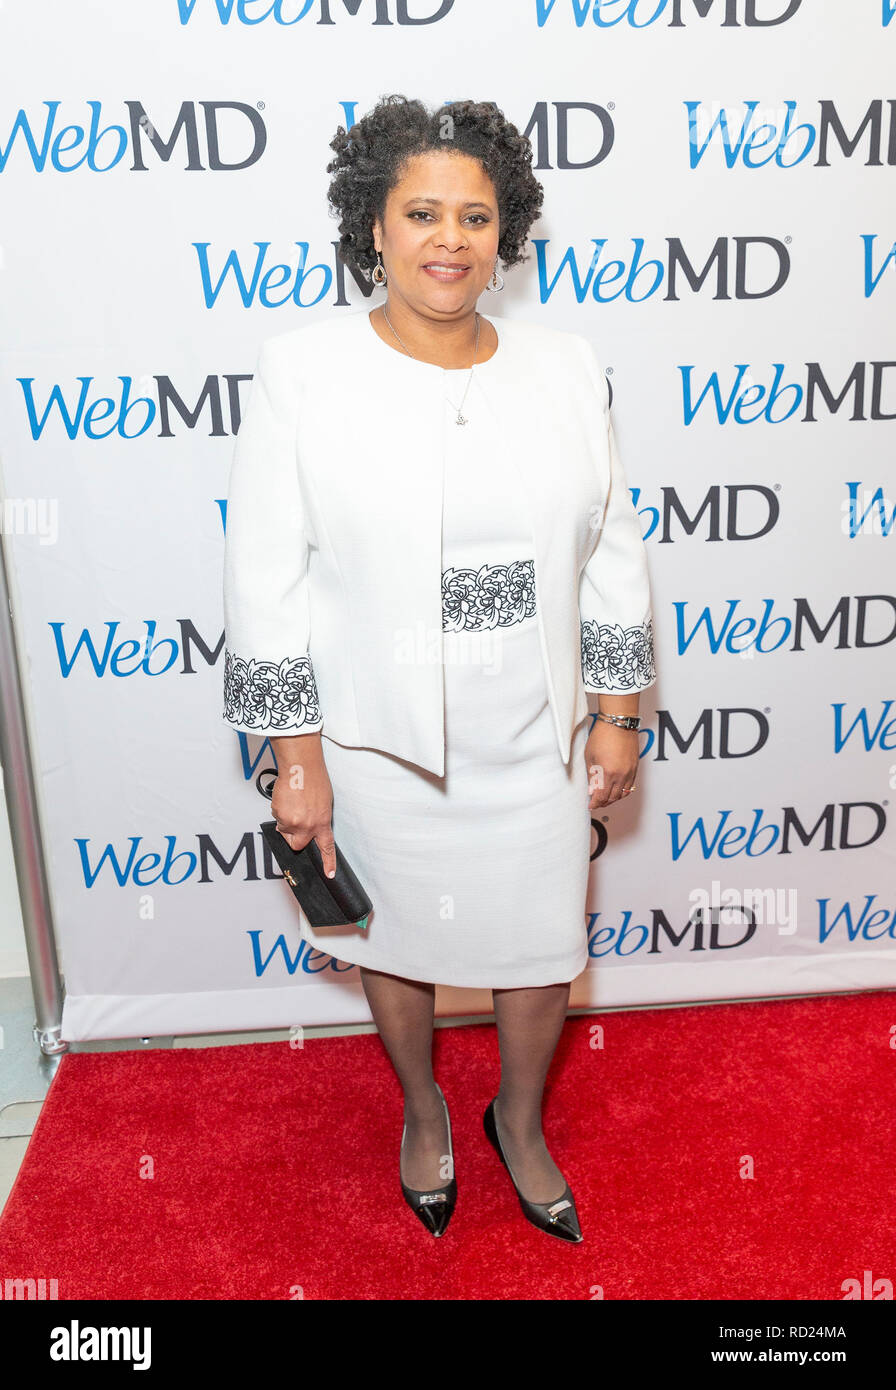 New York, United States. 15th Jan, 2019. Doctor Karen Winkfield attends WebMD Health Hero Awards ceremony at WebMD Corporate Headquarter Credit: Lev Radin/Pacific Press/Alamy Live News Stock Photo